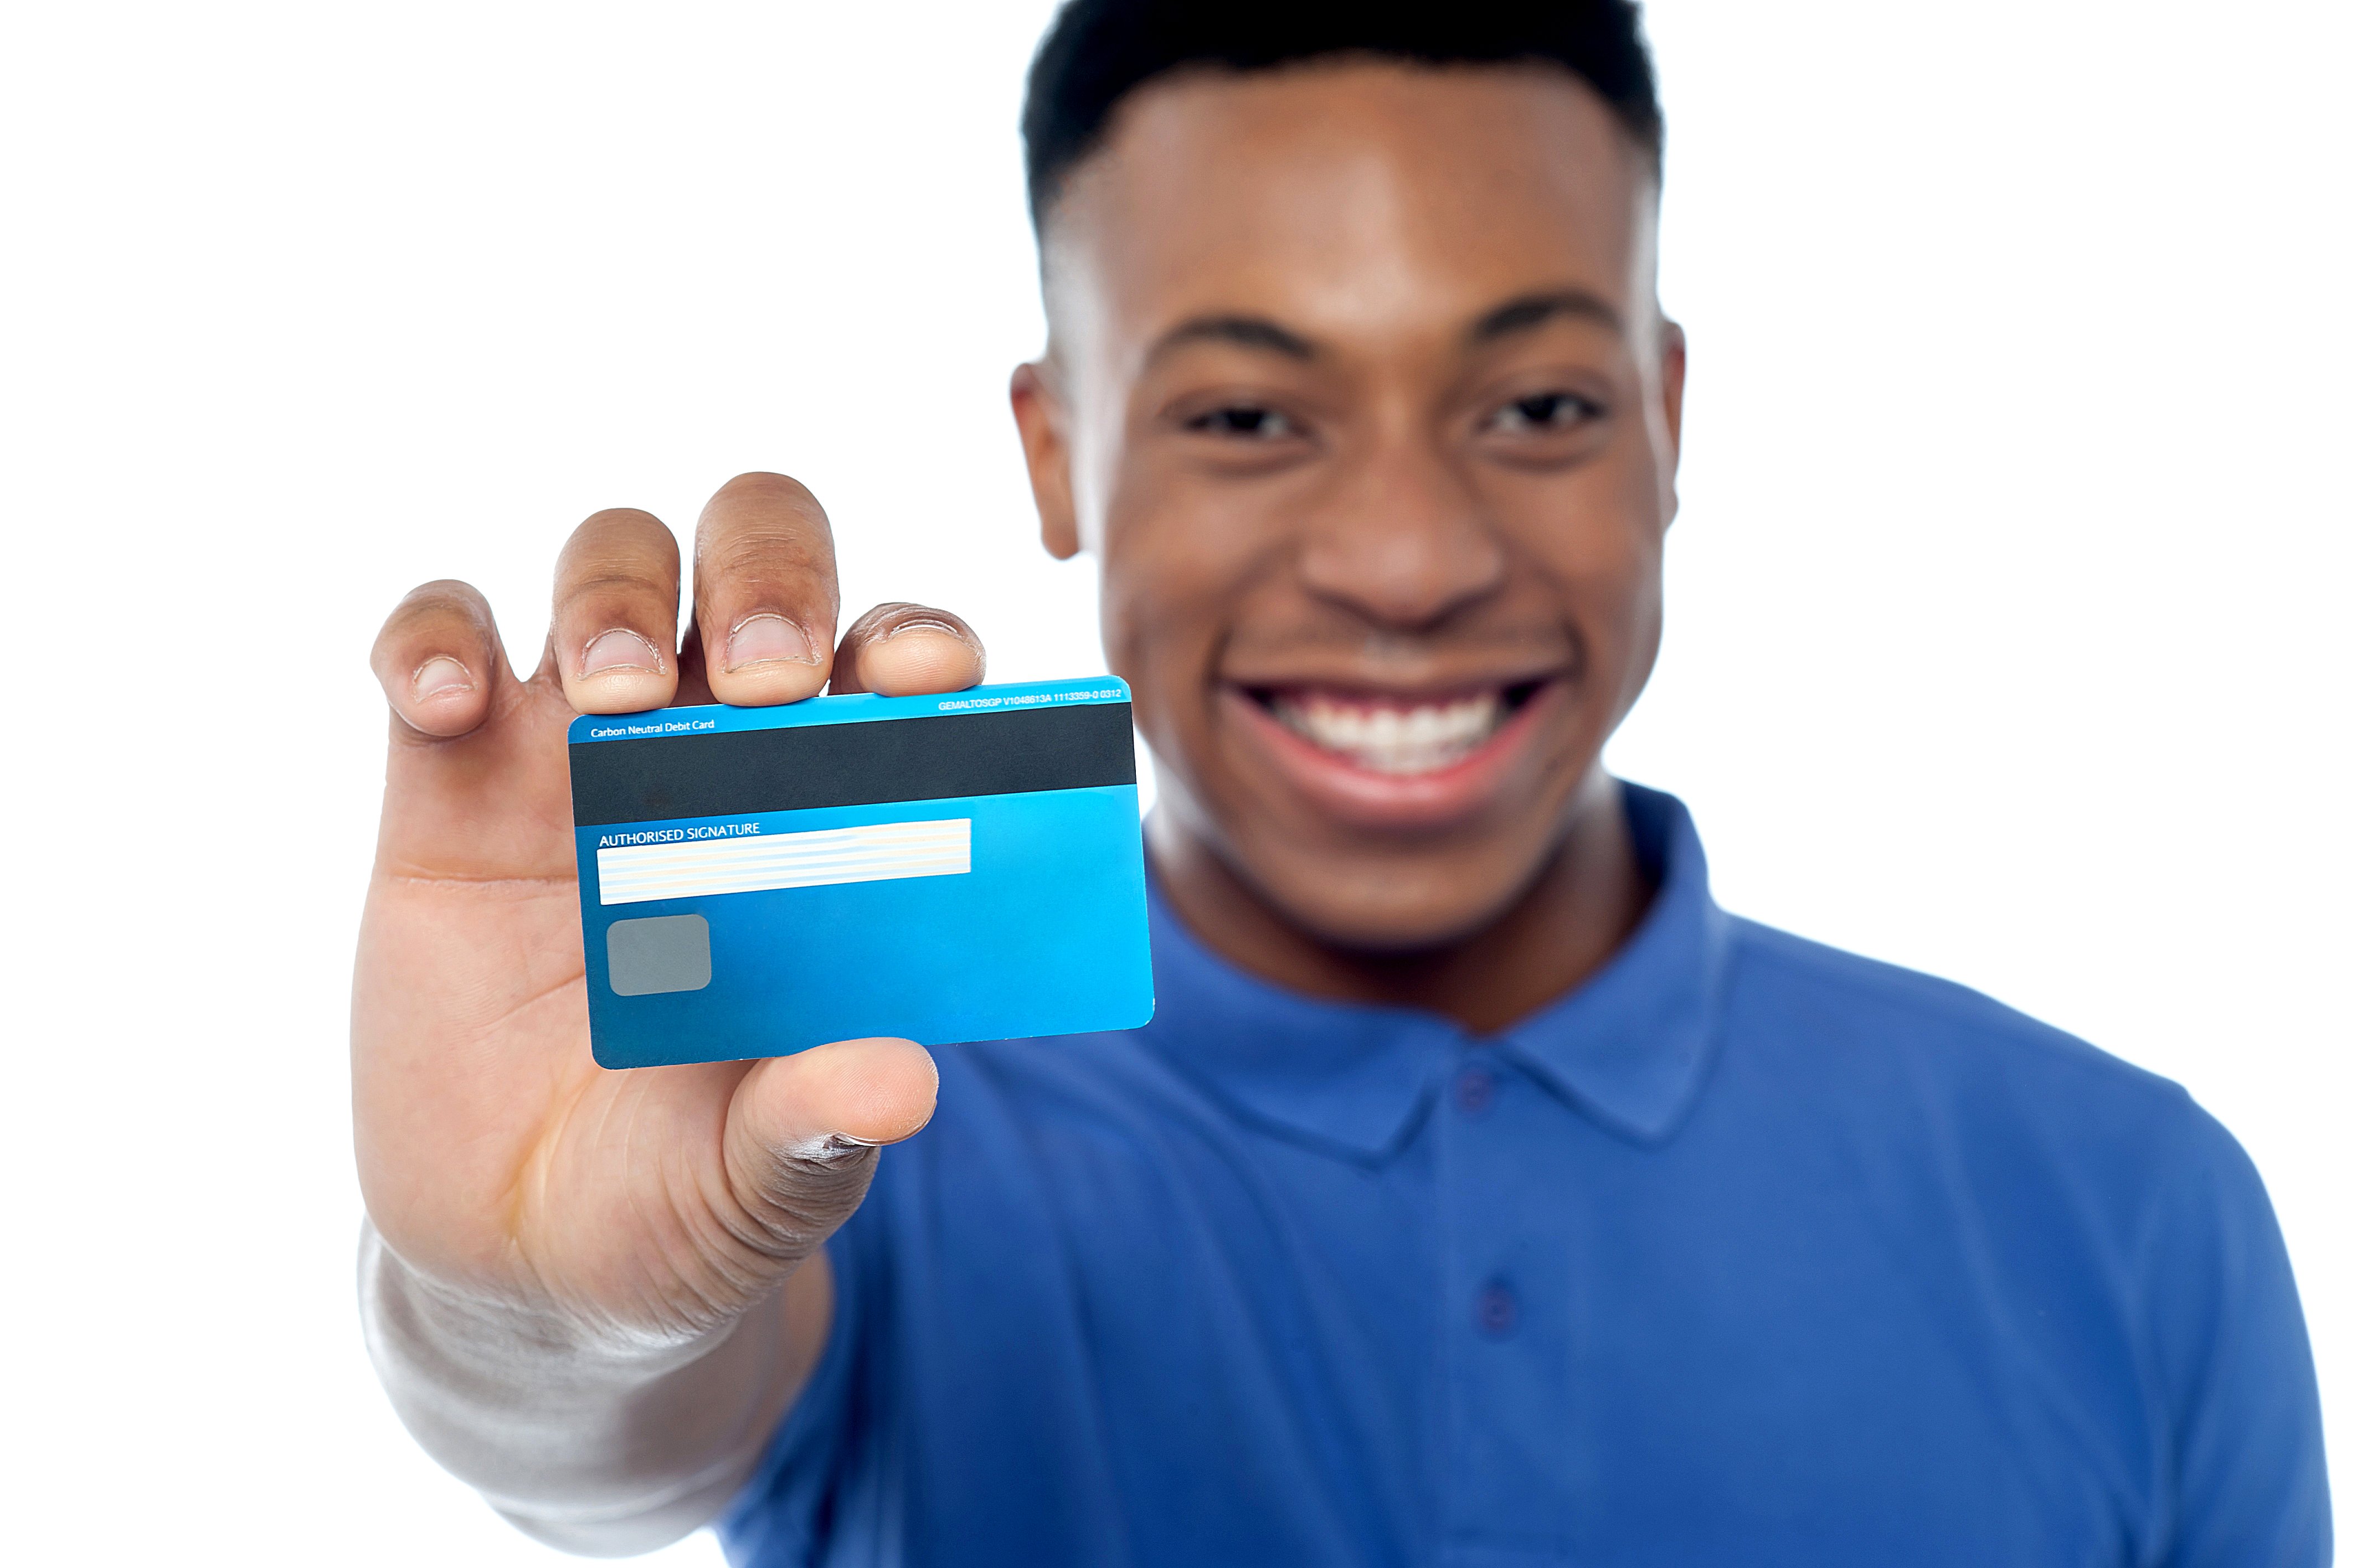 Portrait of young man holding credit card